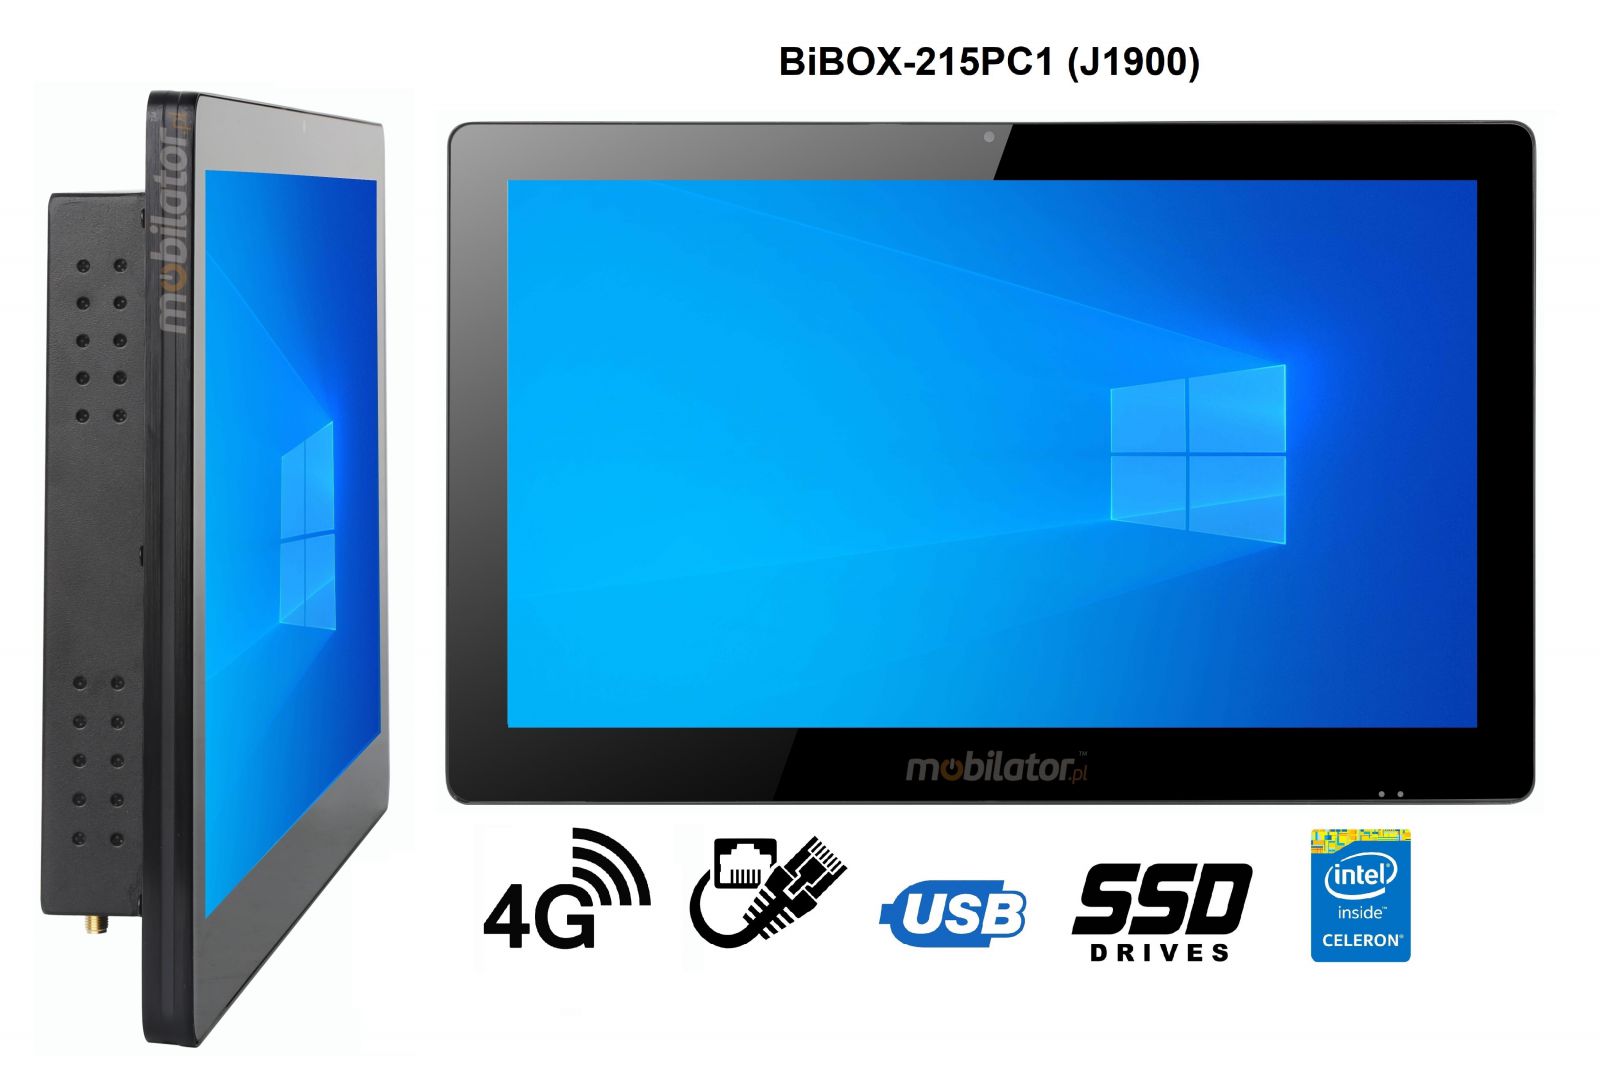 BiBOX-215PC1 (J1900) v.4 - Rugged computer panel with IP65 (water and dust resistance) with 256 GB SSD, 4G technology and WiFi